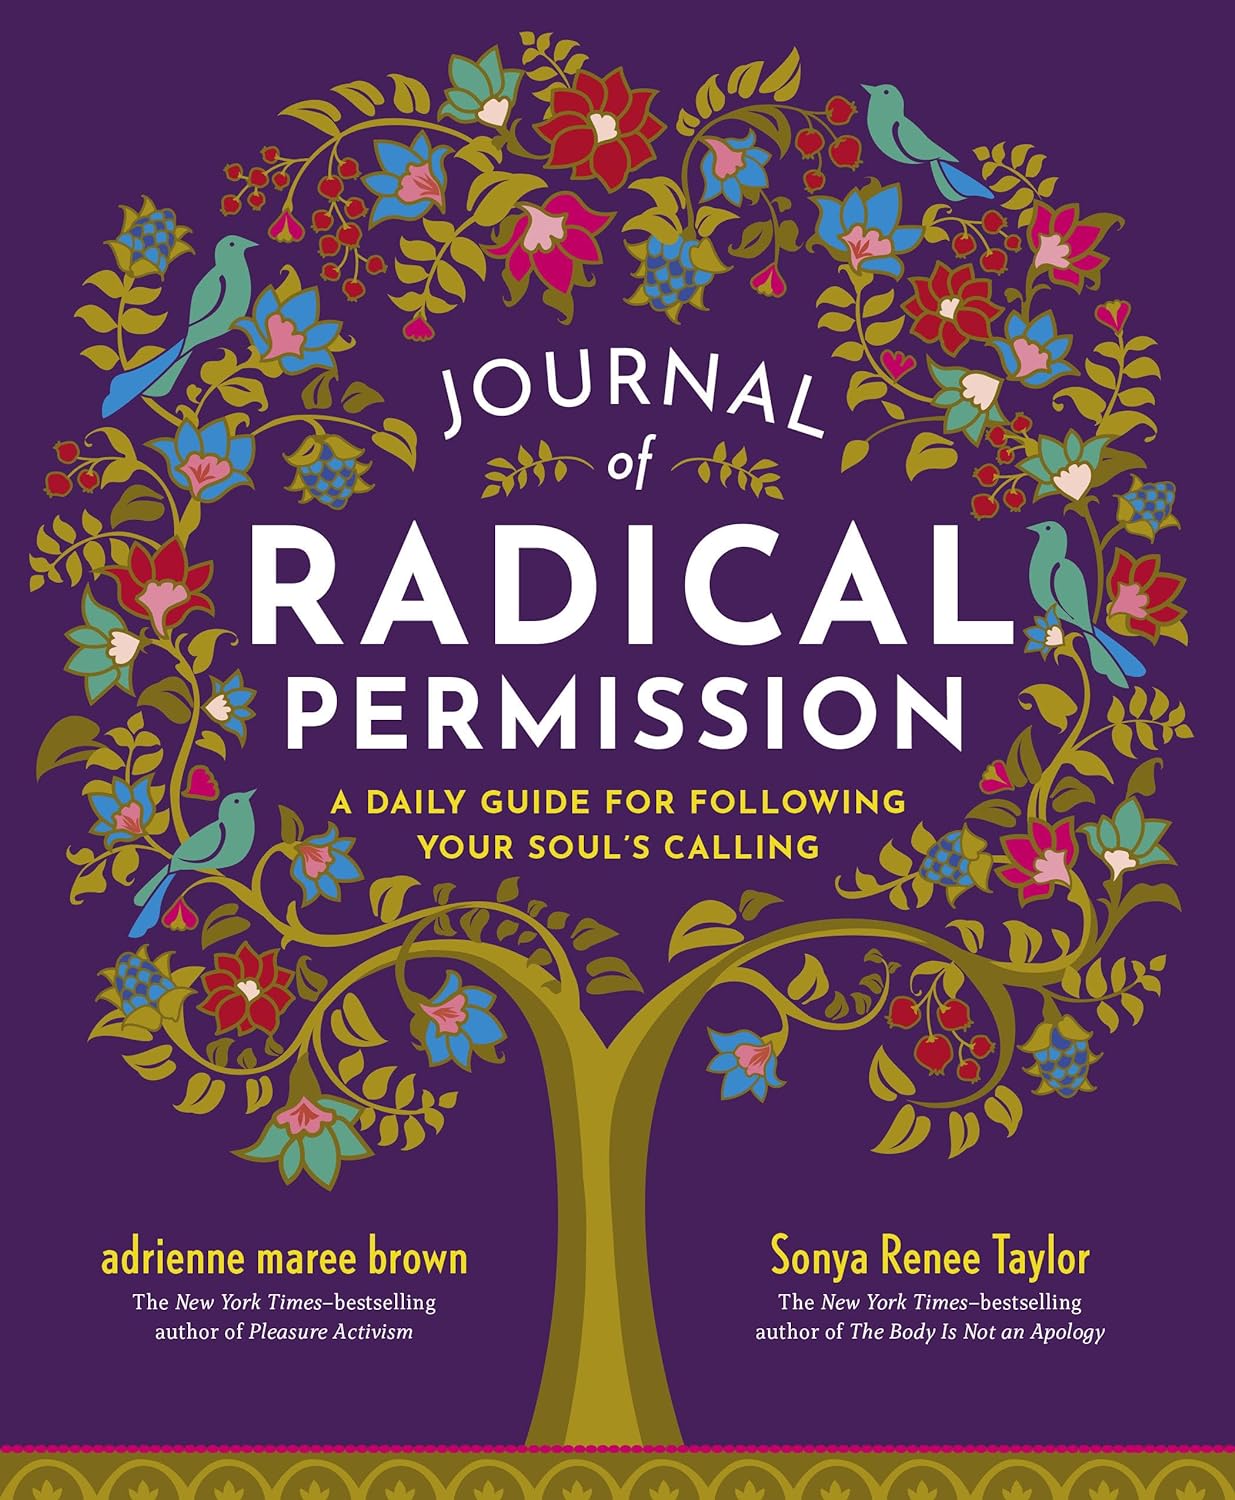 Journal of Radical Permission - A Daily Guide for Following Your Soul's Calling - SureShot Books Publishing LLC